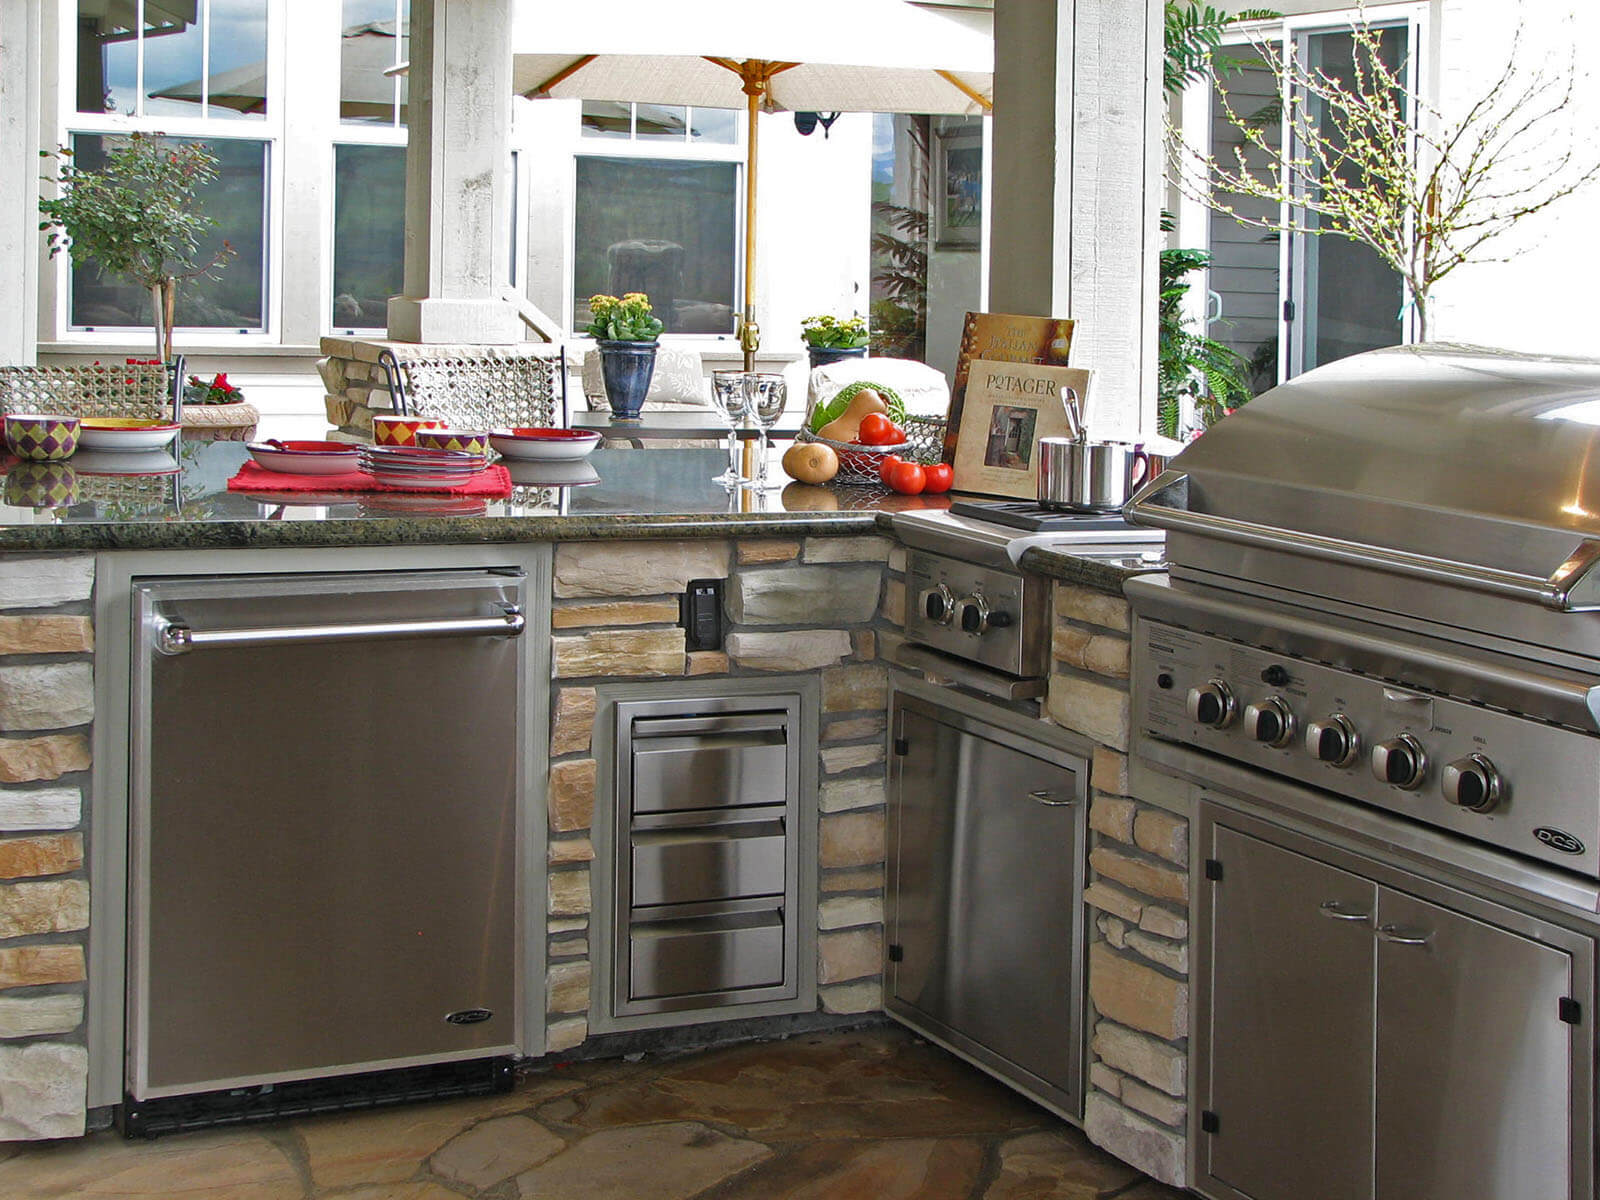 Compact patio cooking area with two burner stove and custom in-counter grill